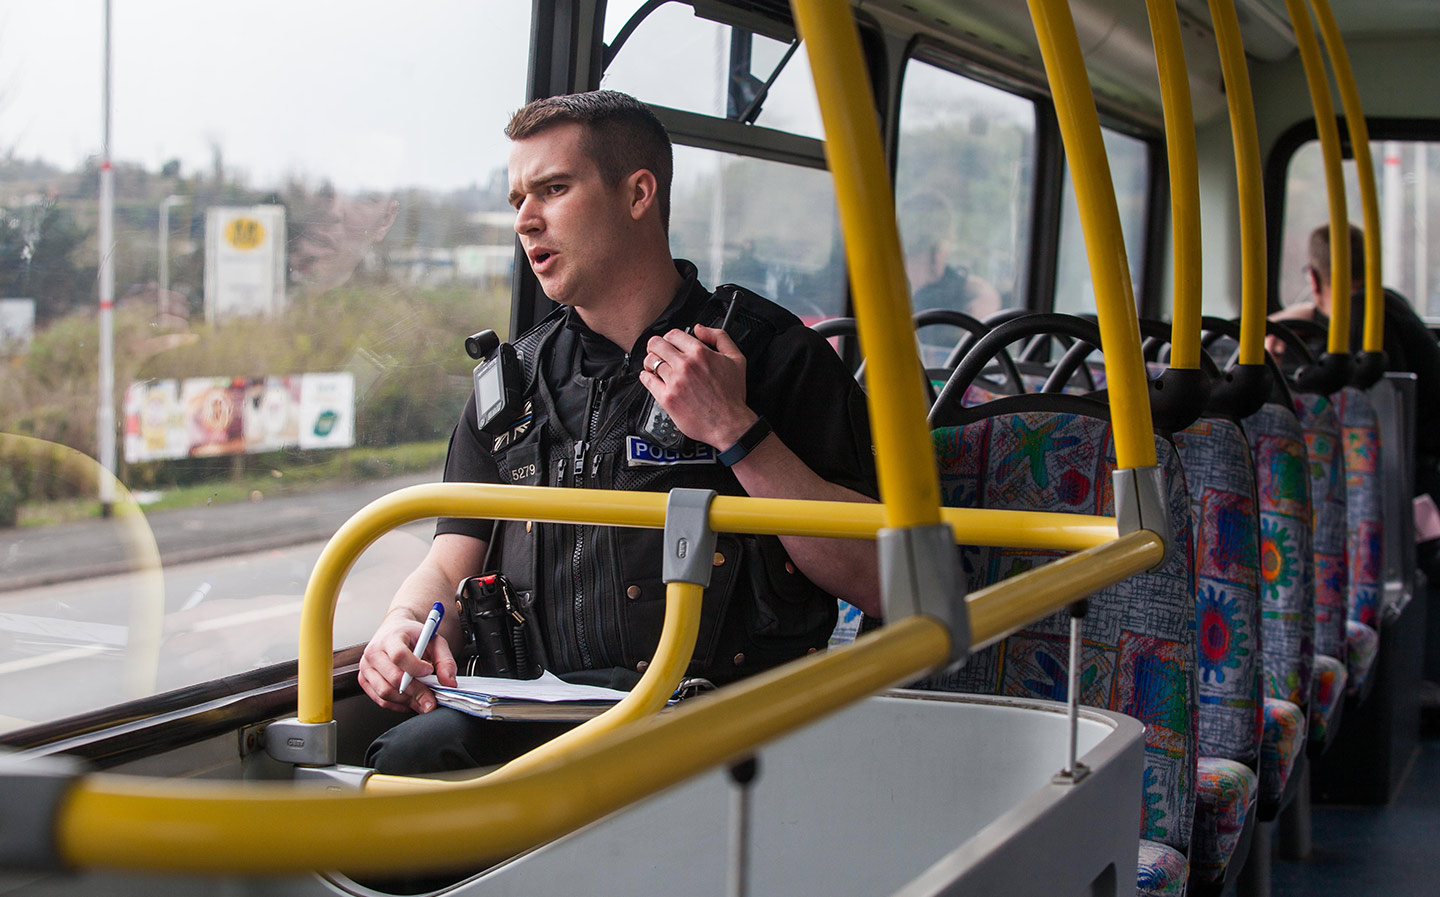 Bobbies on the bus catch motorists using mobiles